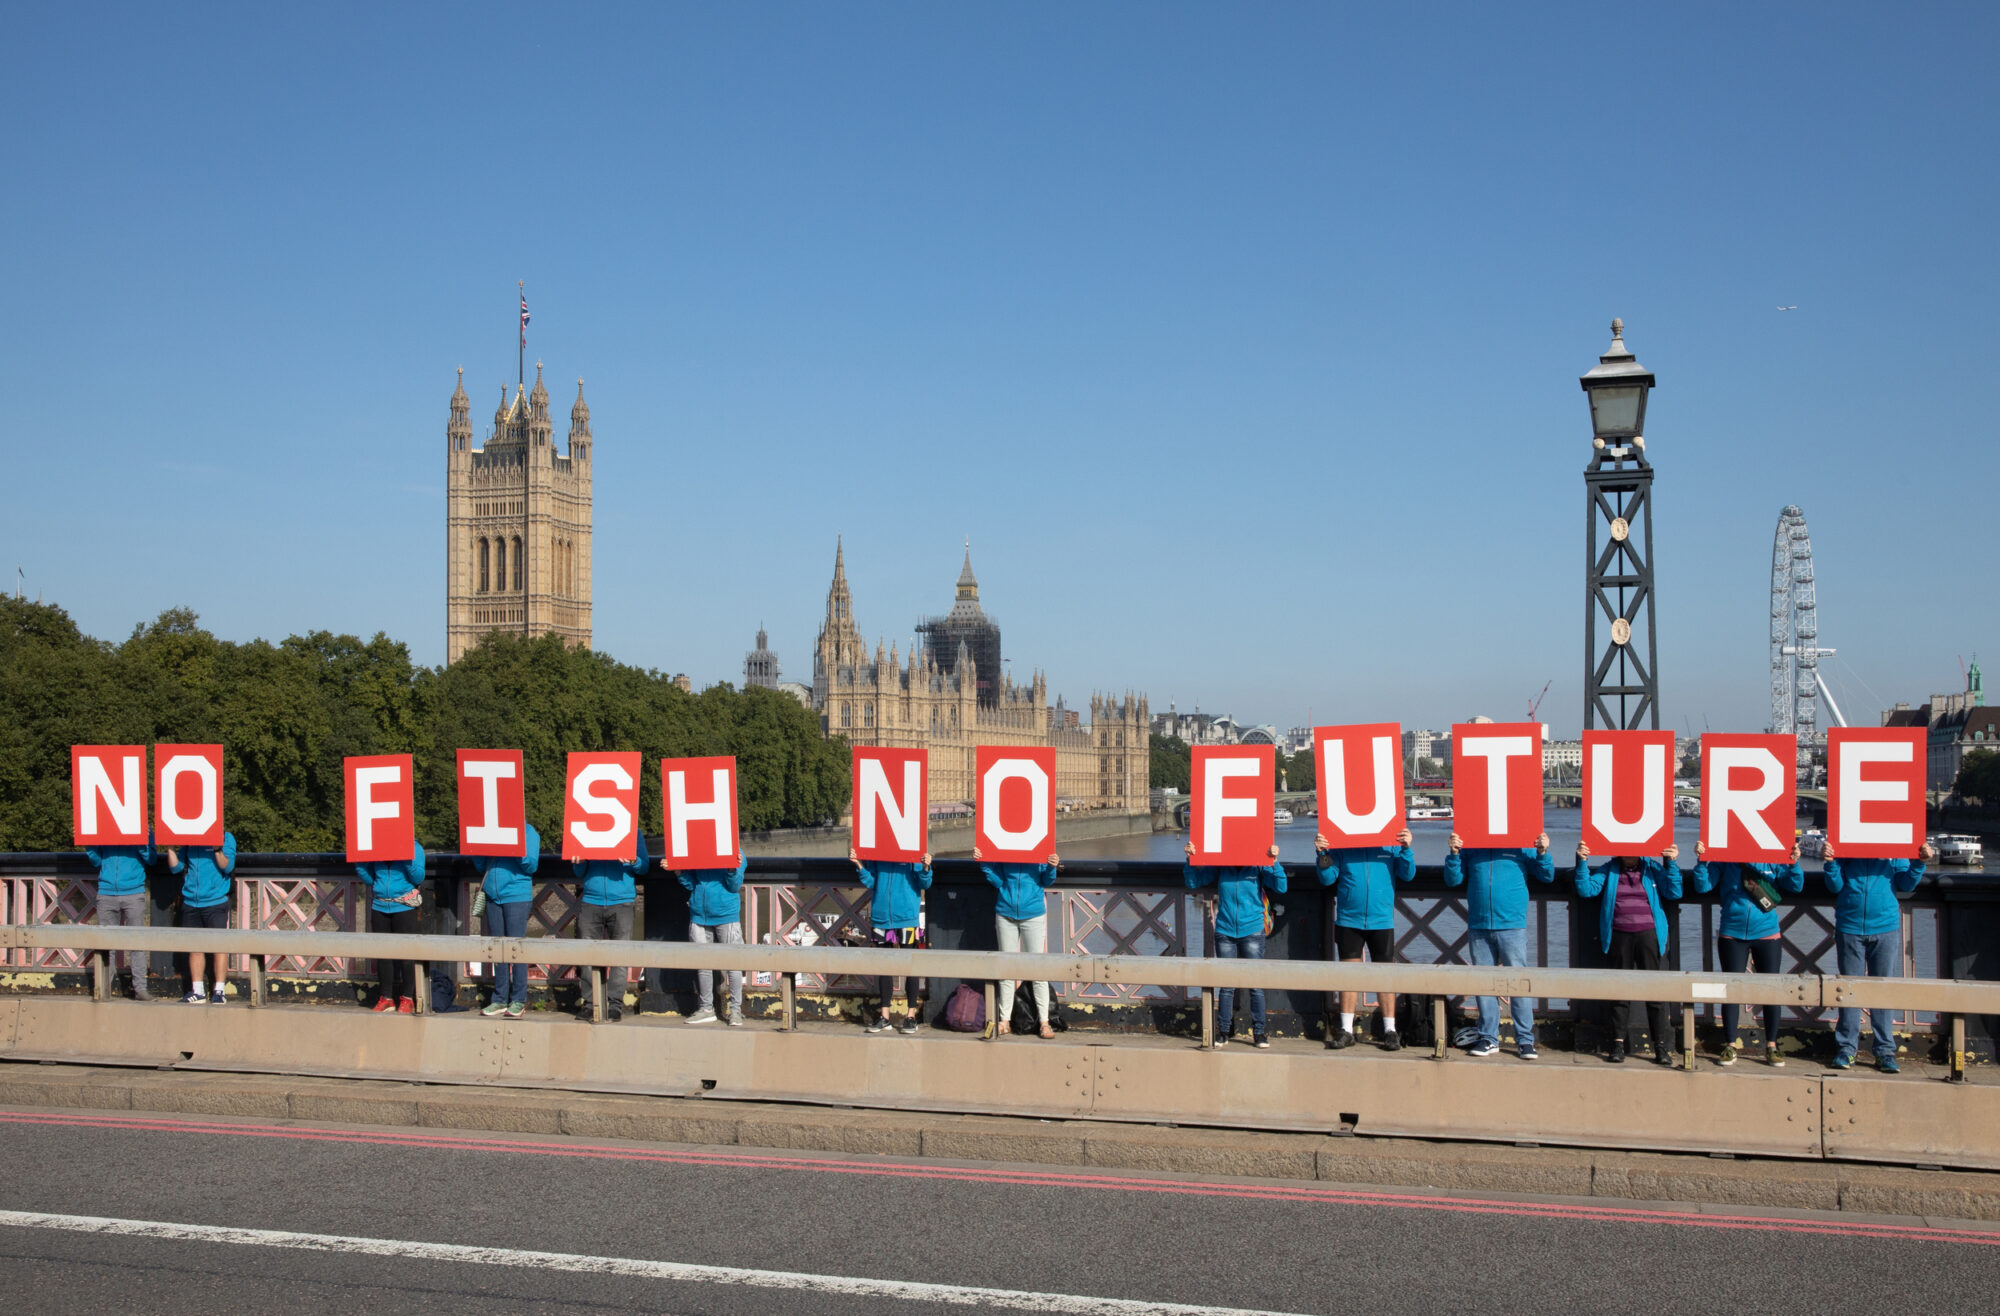 A group of activists hold up a sign reading "No Fish No Future". The Houses of Parliament can be seen behind them